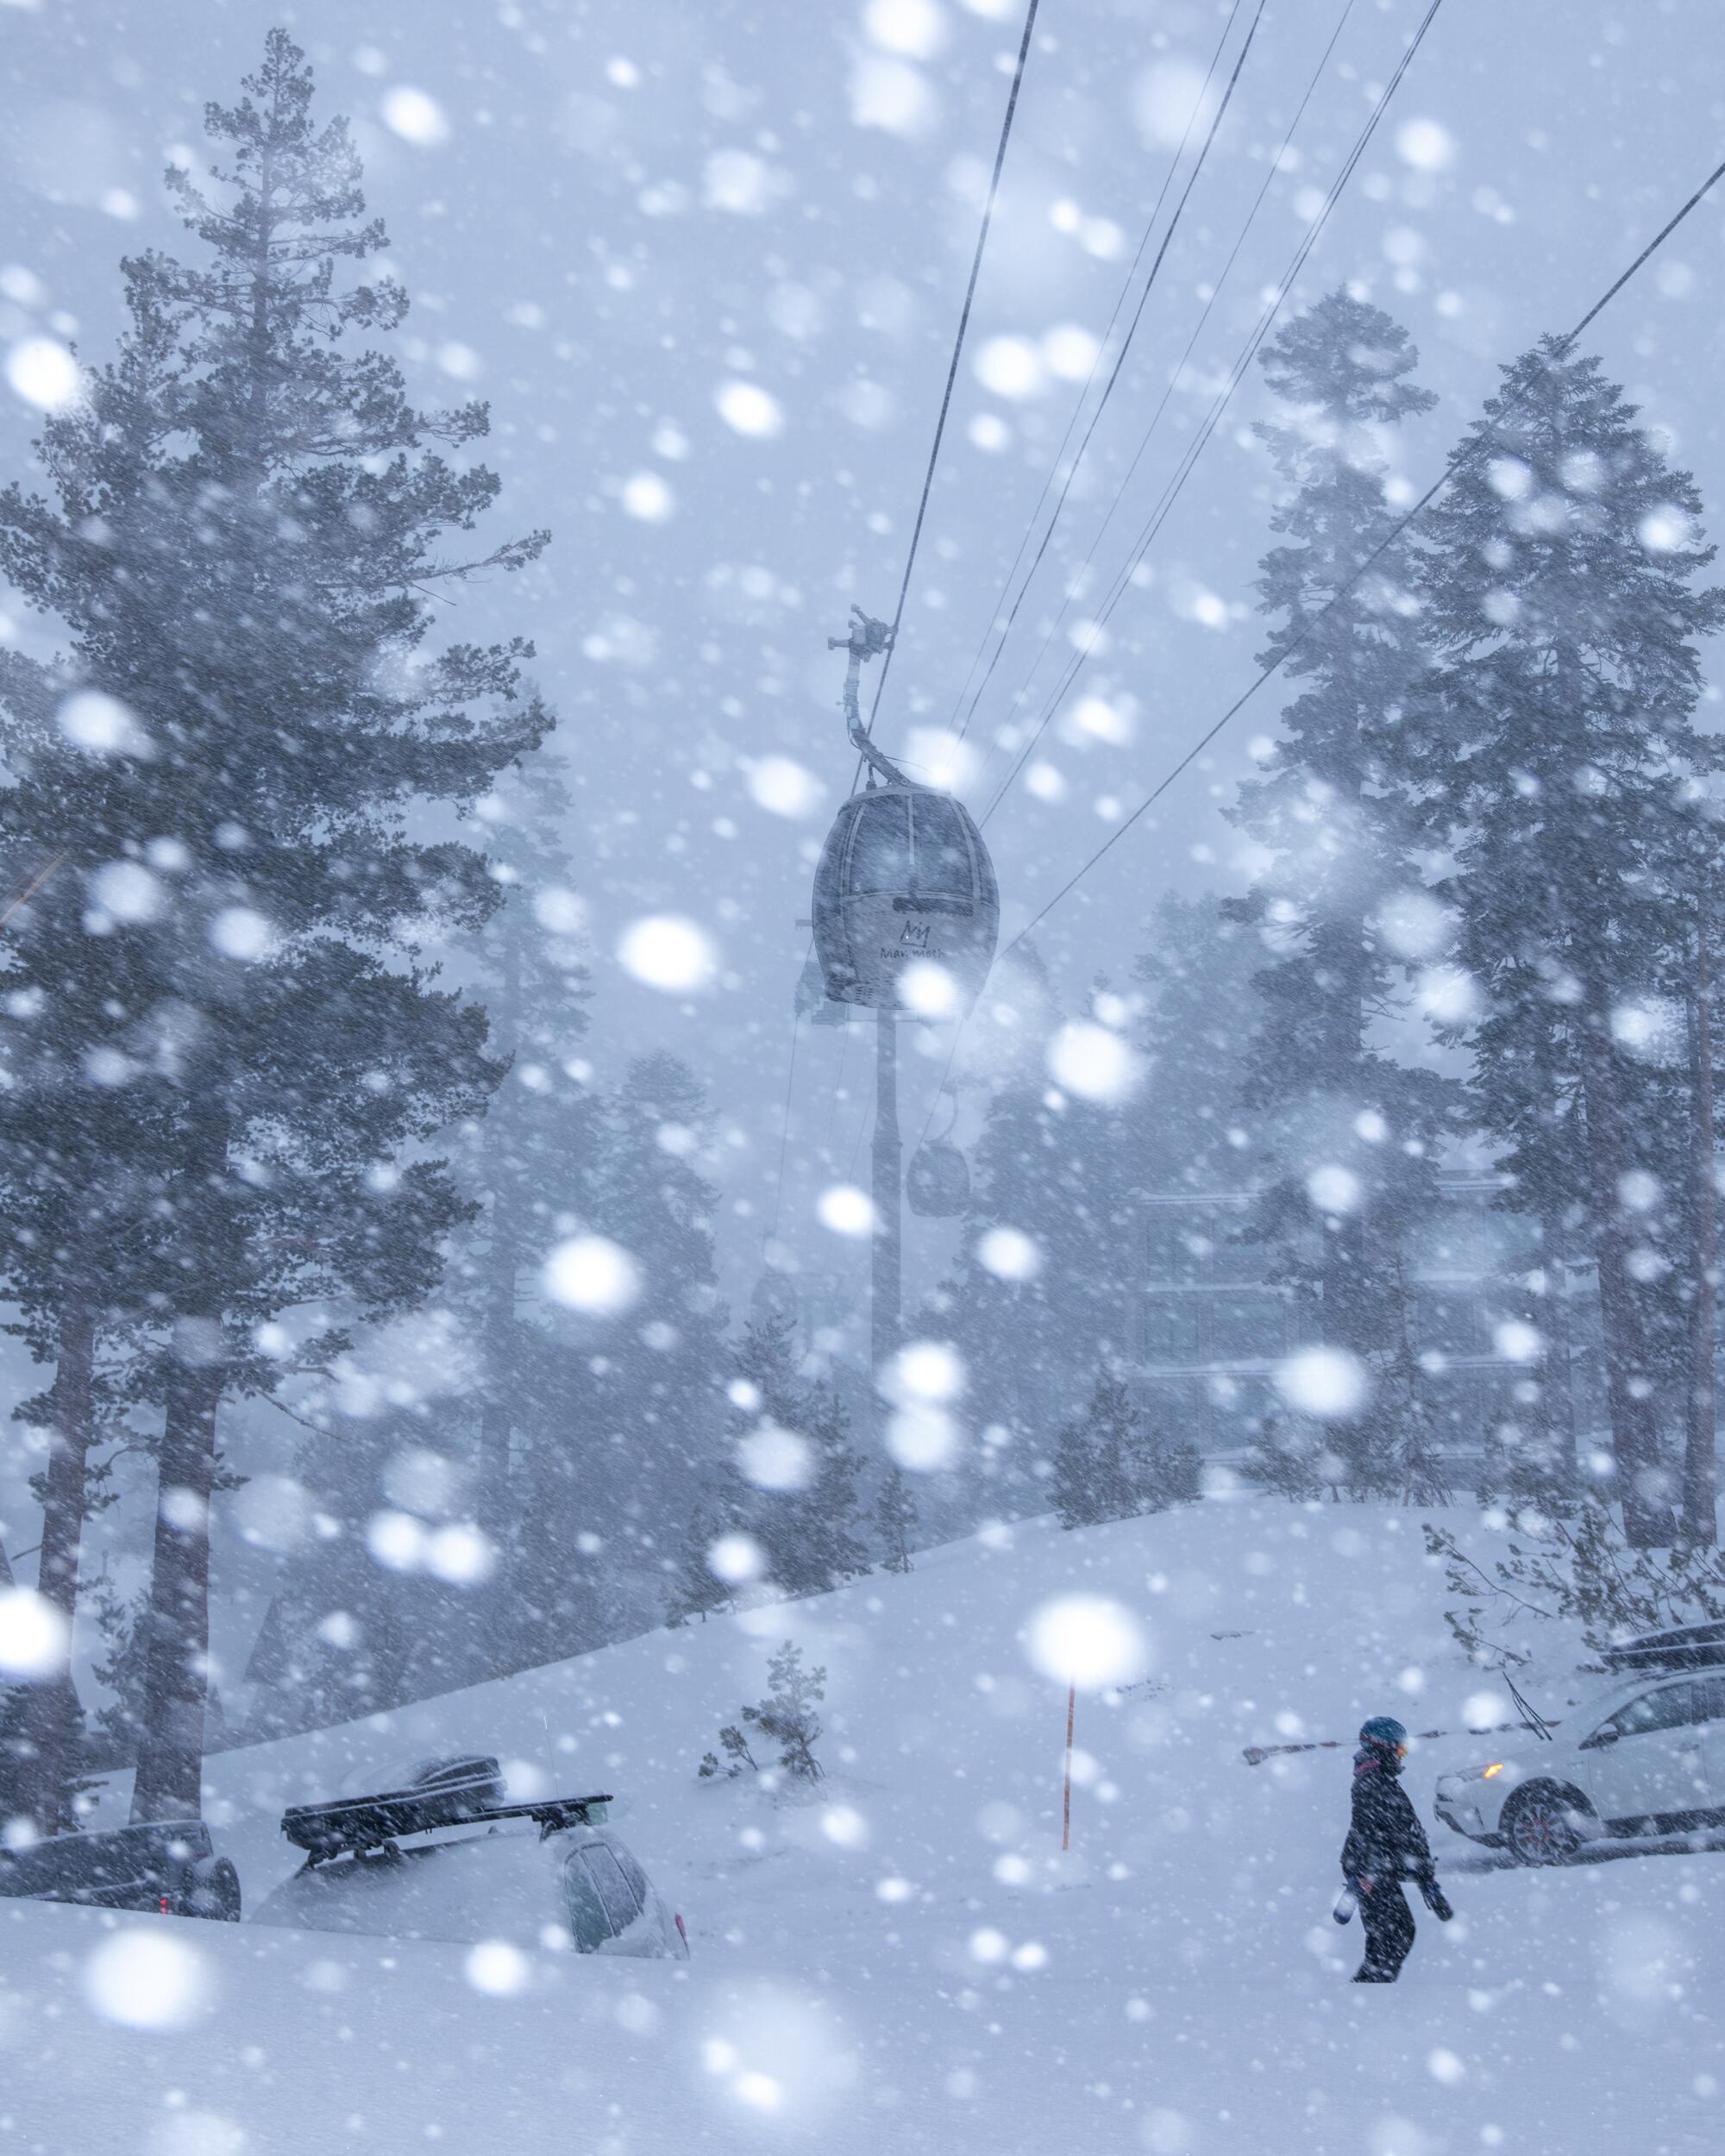 Snow falls on a scene of a person, pine trees, snow-covered ground, and an aerial lift.